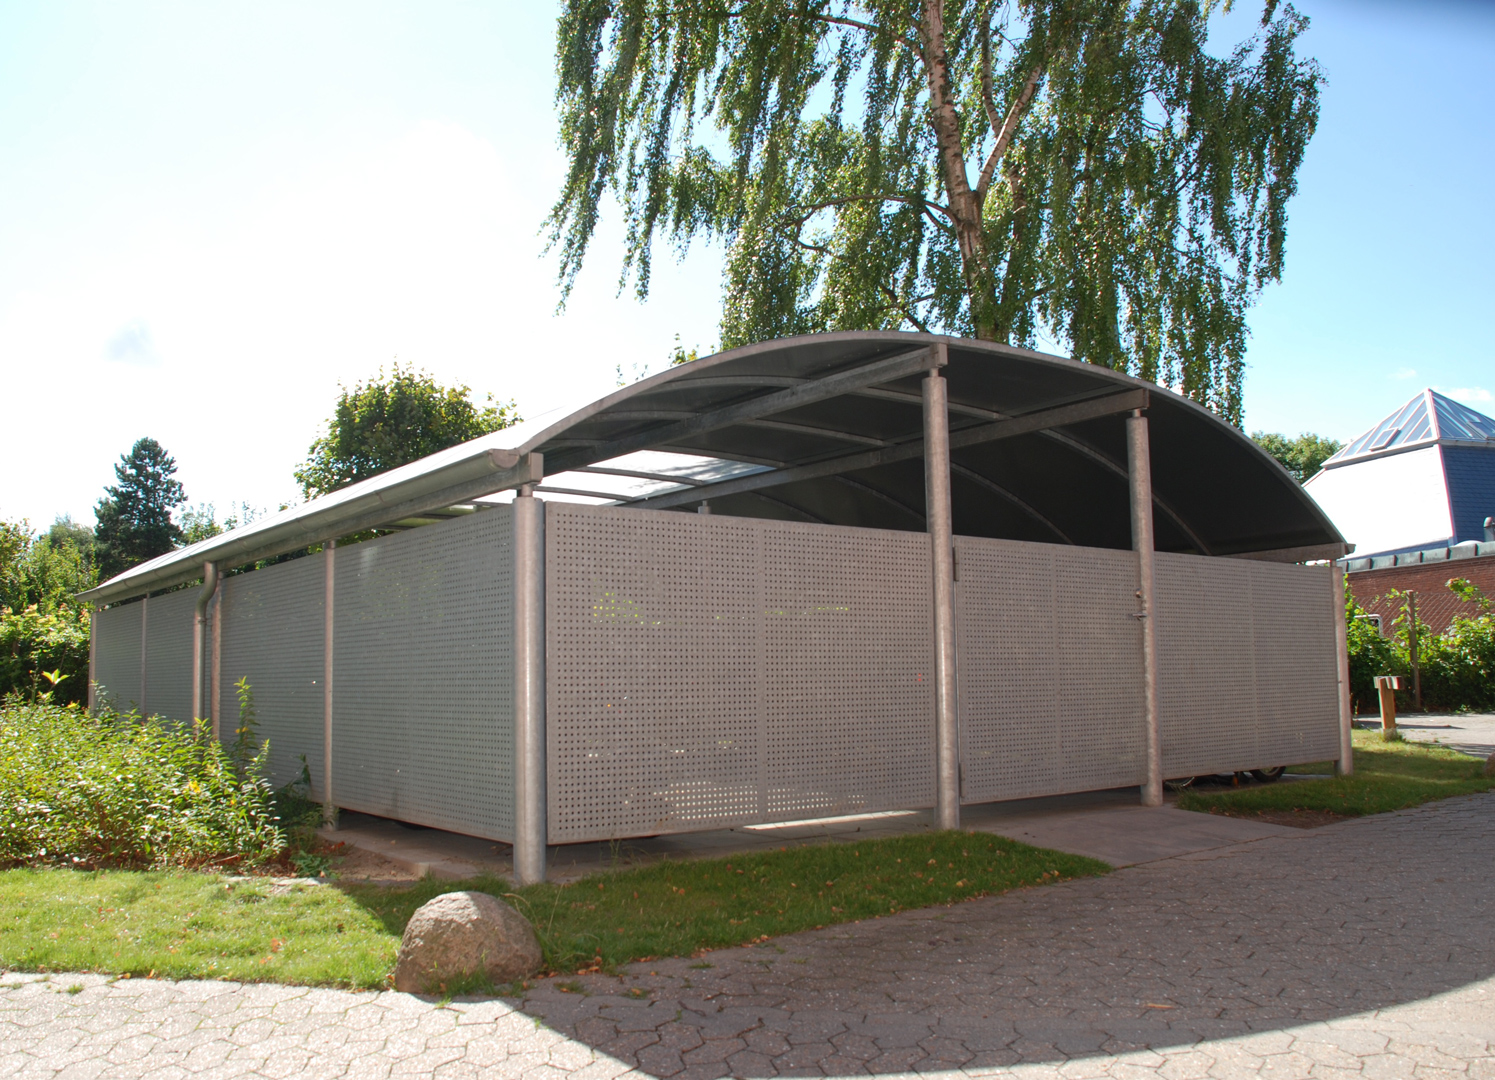 Bin shelter with a steel roof and sides